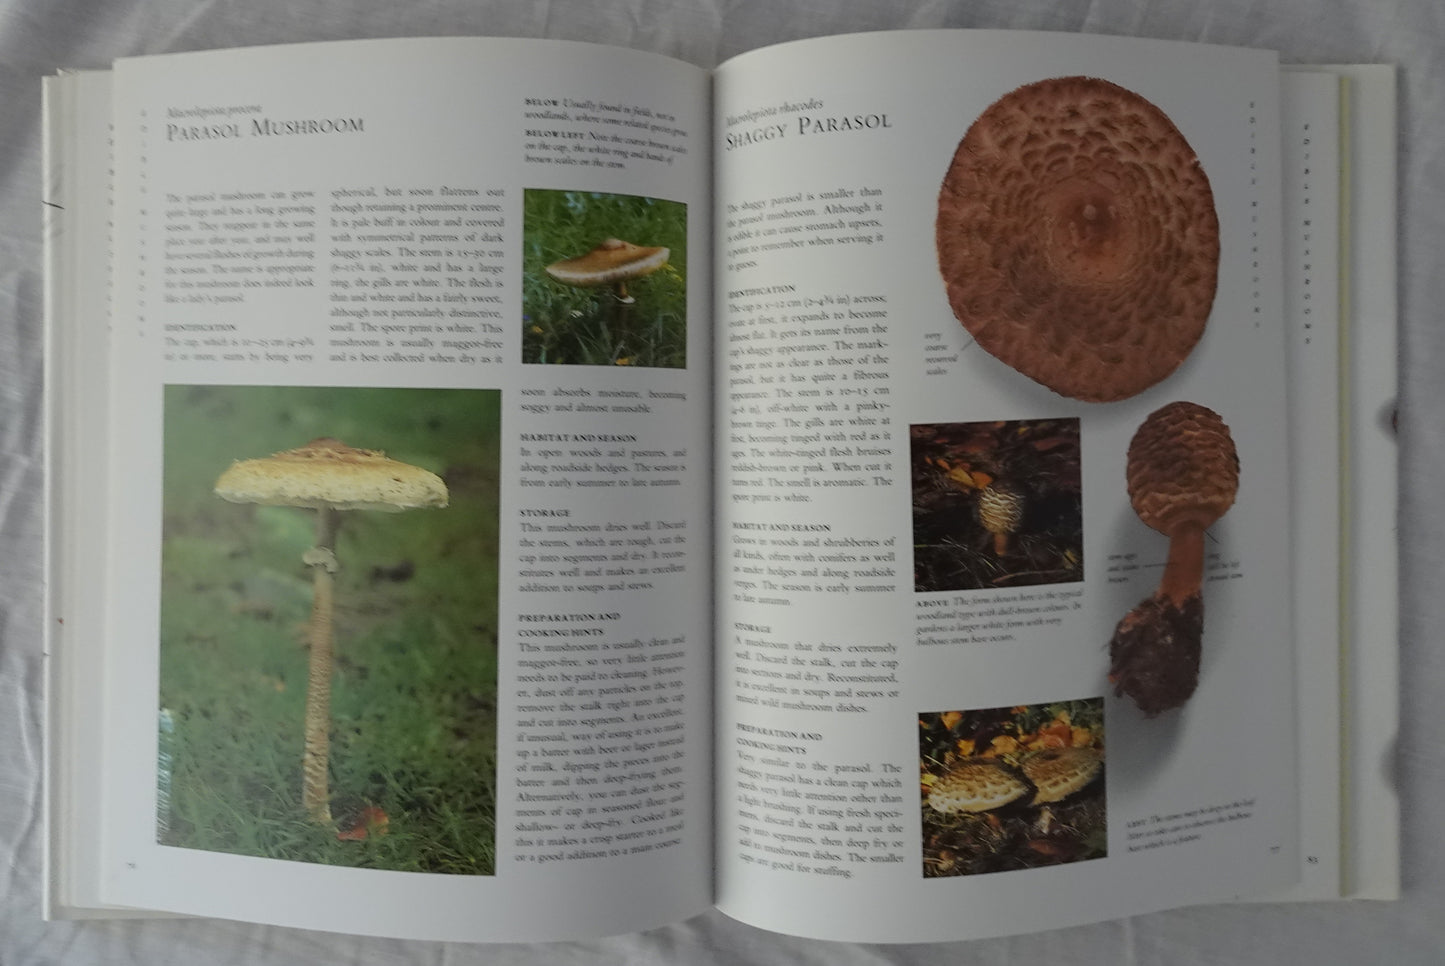 The New Guide to Mushrooms by Peter Jordan